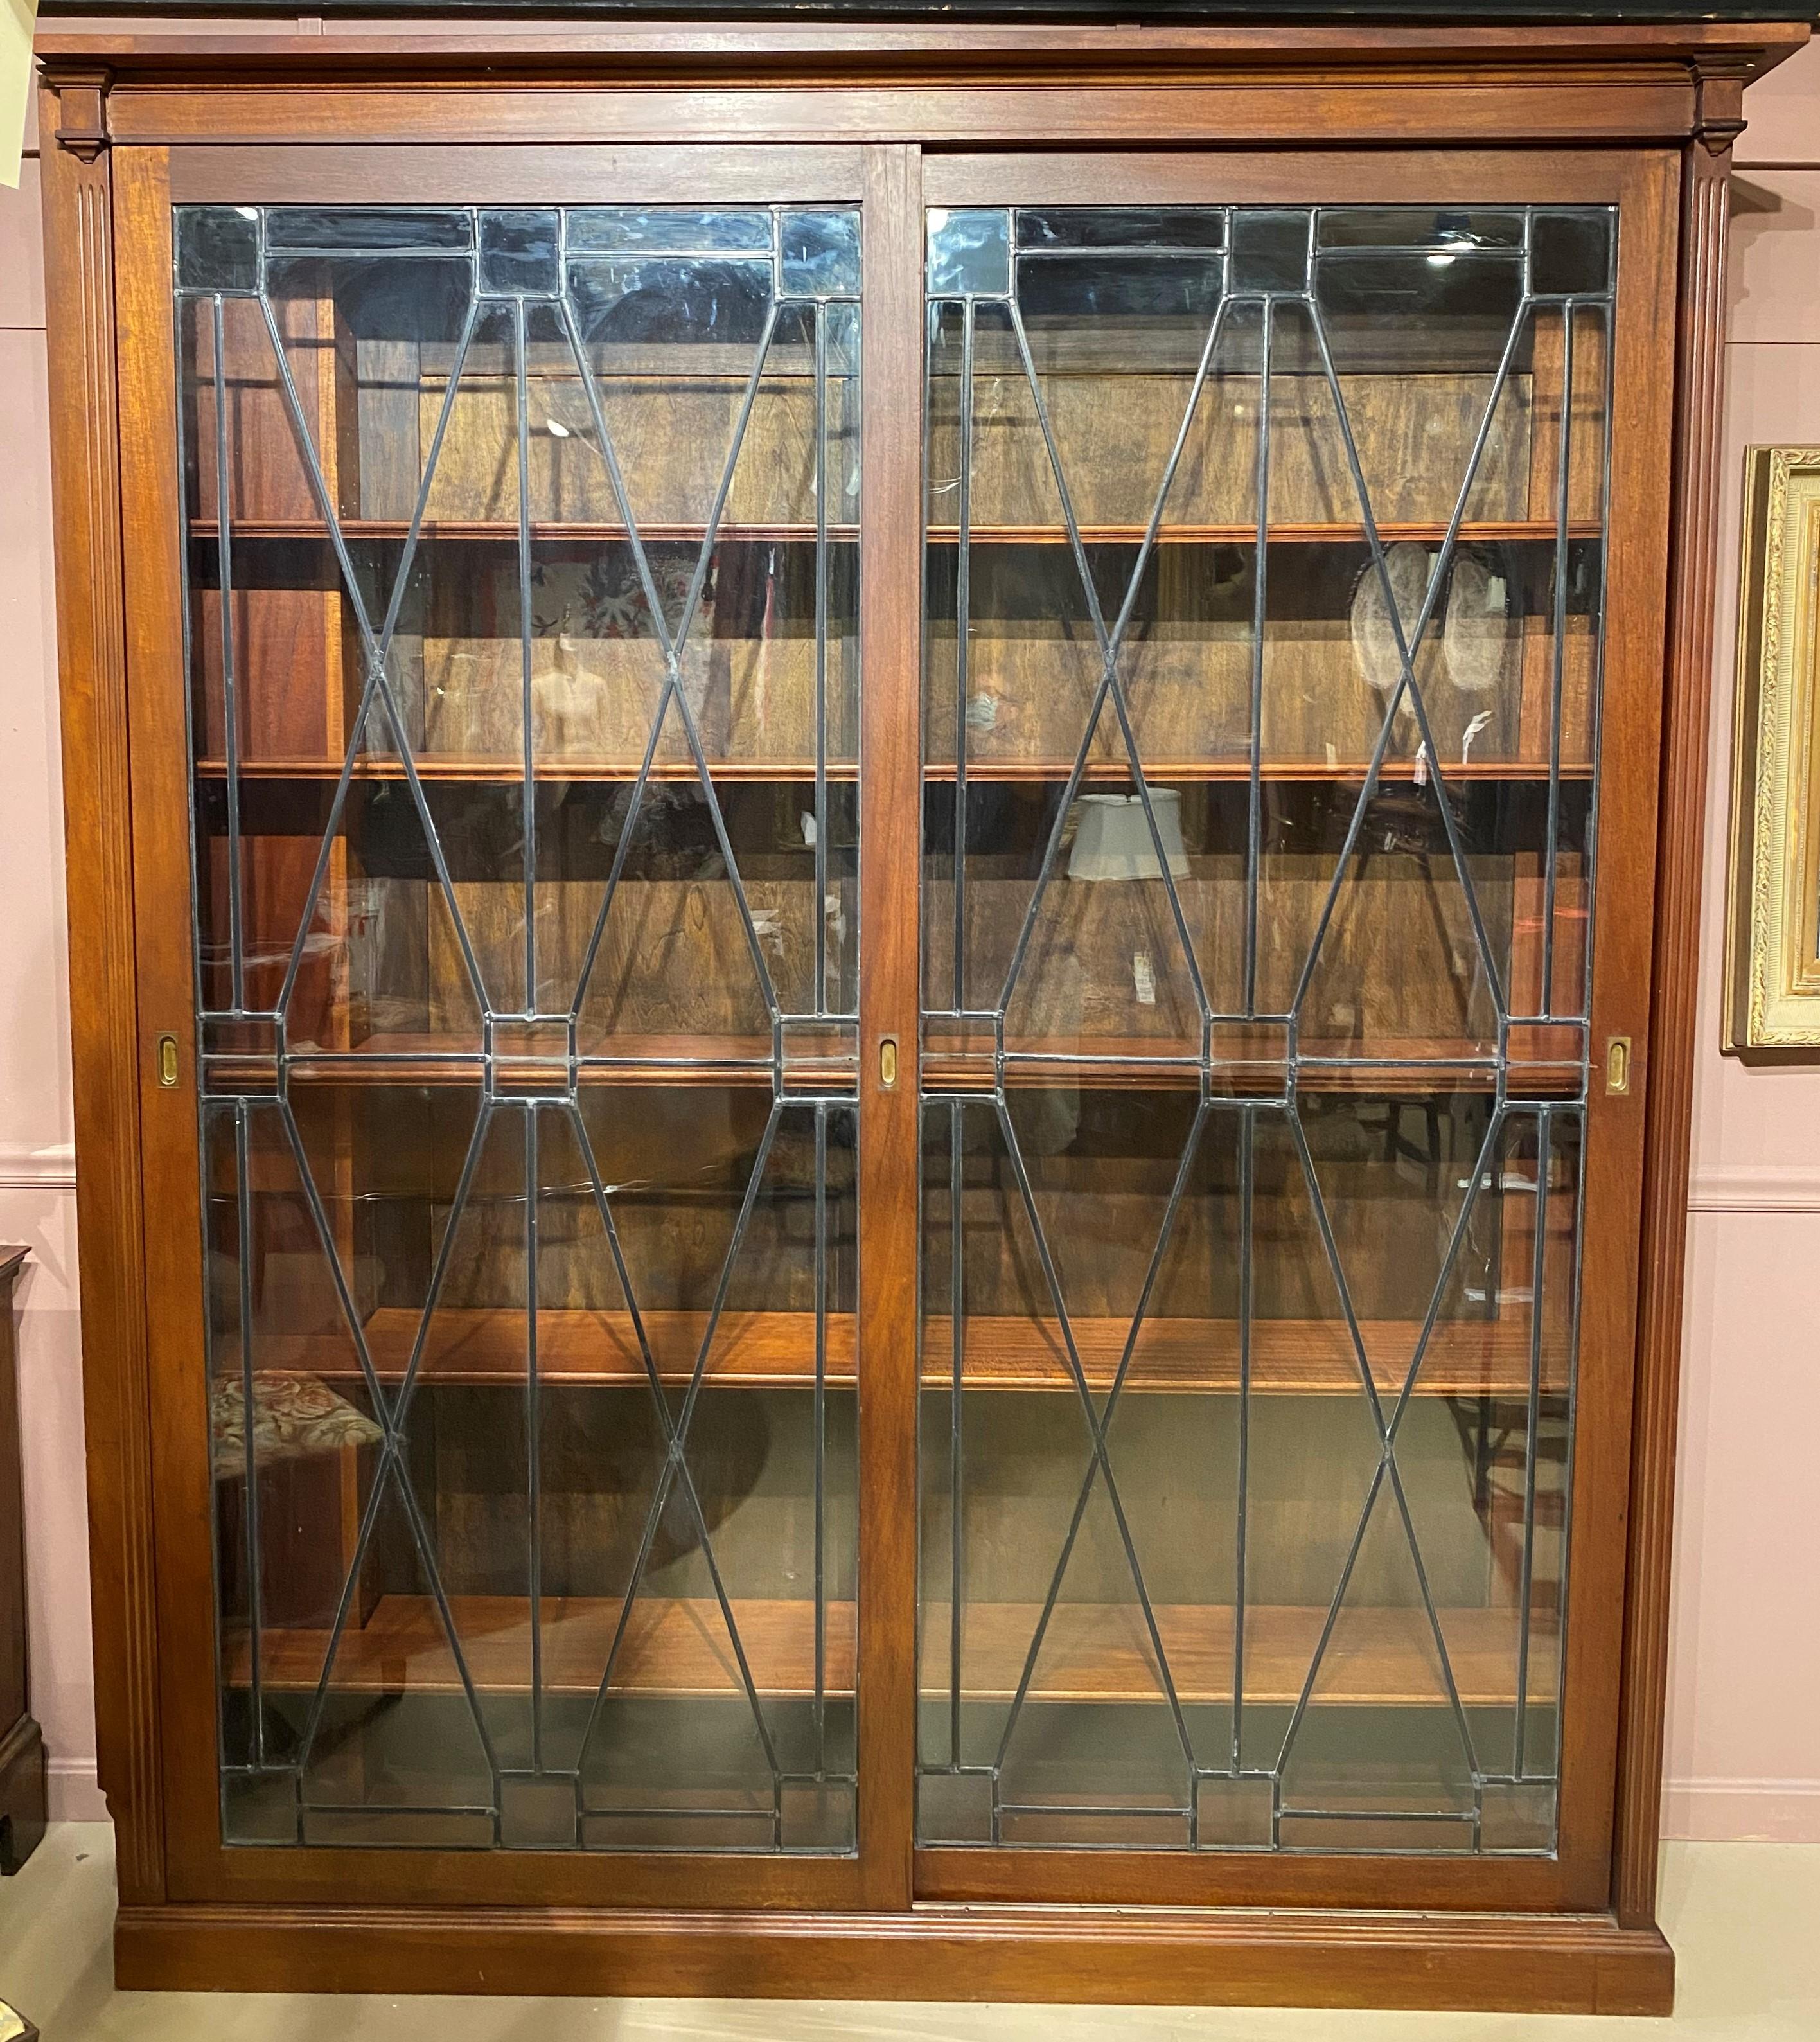 A fine large two-door bookcase with sliding leaded glass doors and adjustable shelves, originally a built-in floor to ceiling piece, with a cut-in on the left side, built around heating pipes in the building. The top would have had molding that was